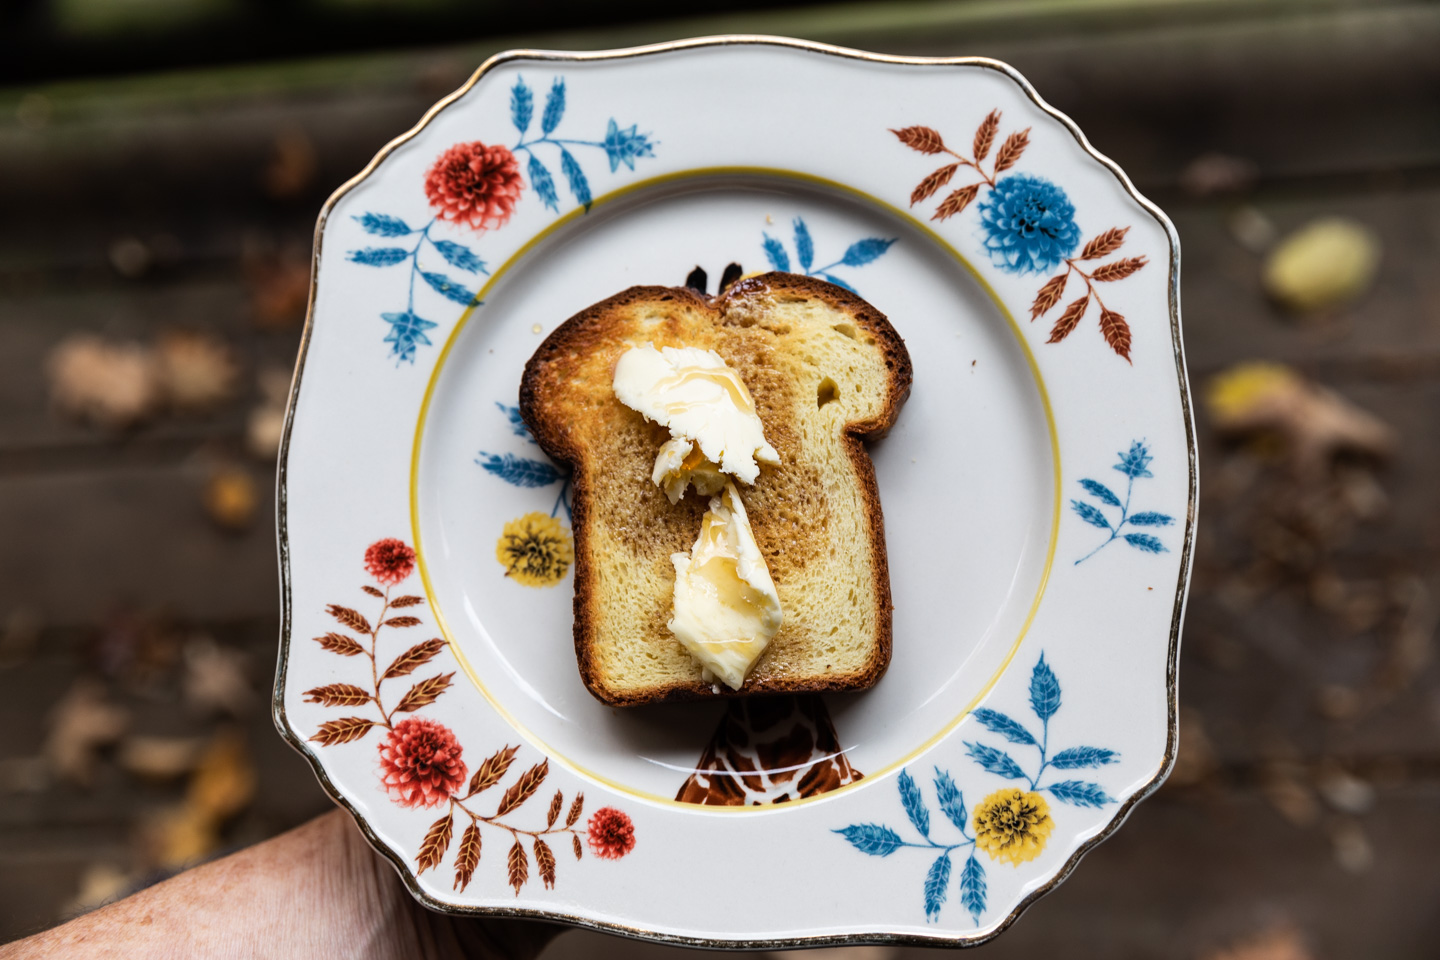 food photographer Midwest - Local maple syrup is drizzled on top of a toasted slice of buttered homemade brioche bread at the Milkweed Inn